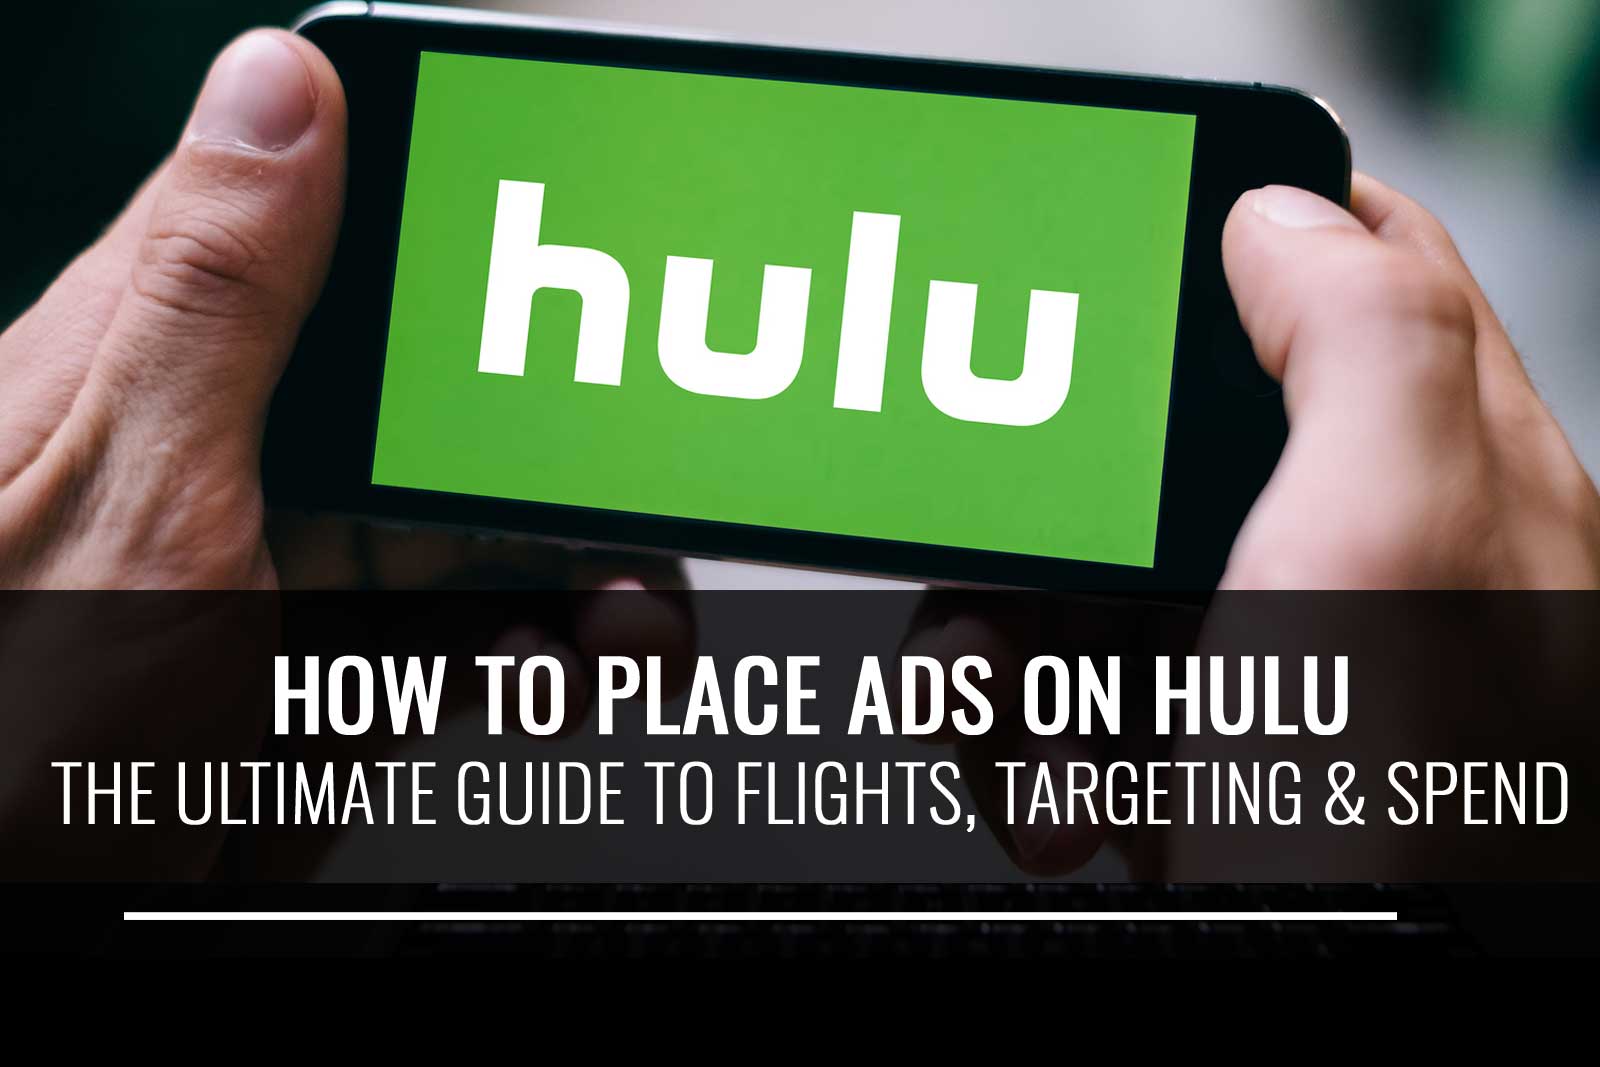 How to place ads on Hulu The Ultimate Guide to flights, targeting and